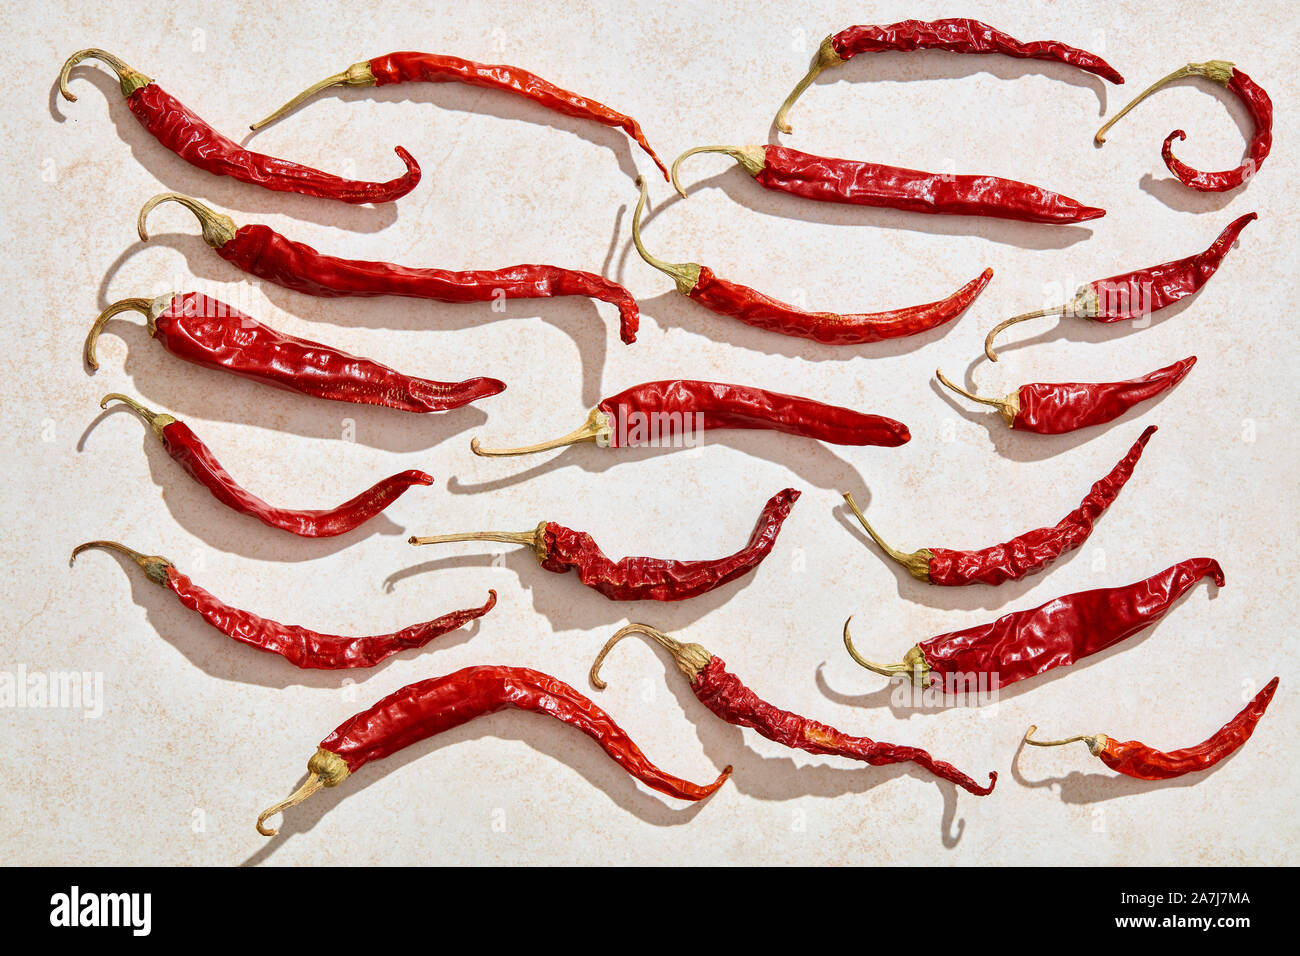 Sun dried red hot chili peppers under harsh sunlight with white stone background. Top view Stock Photo